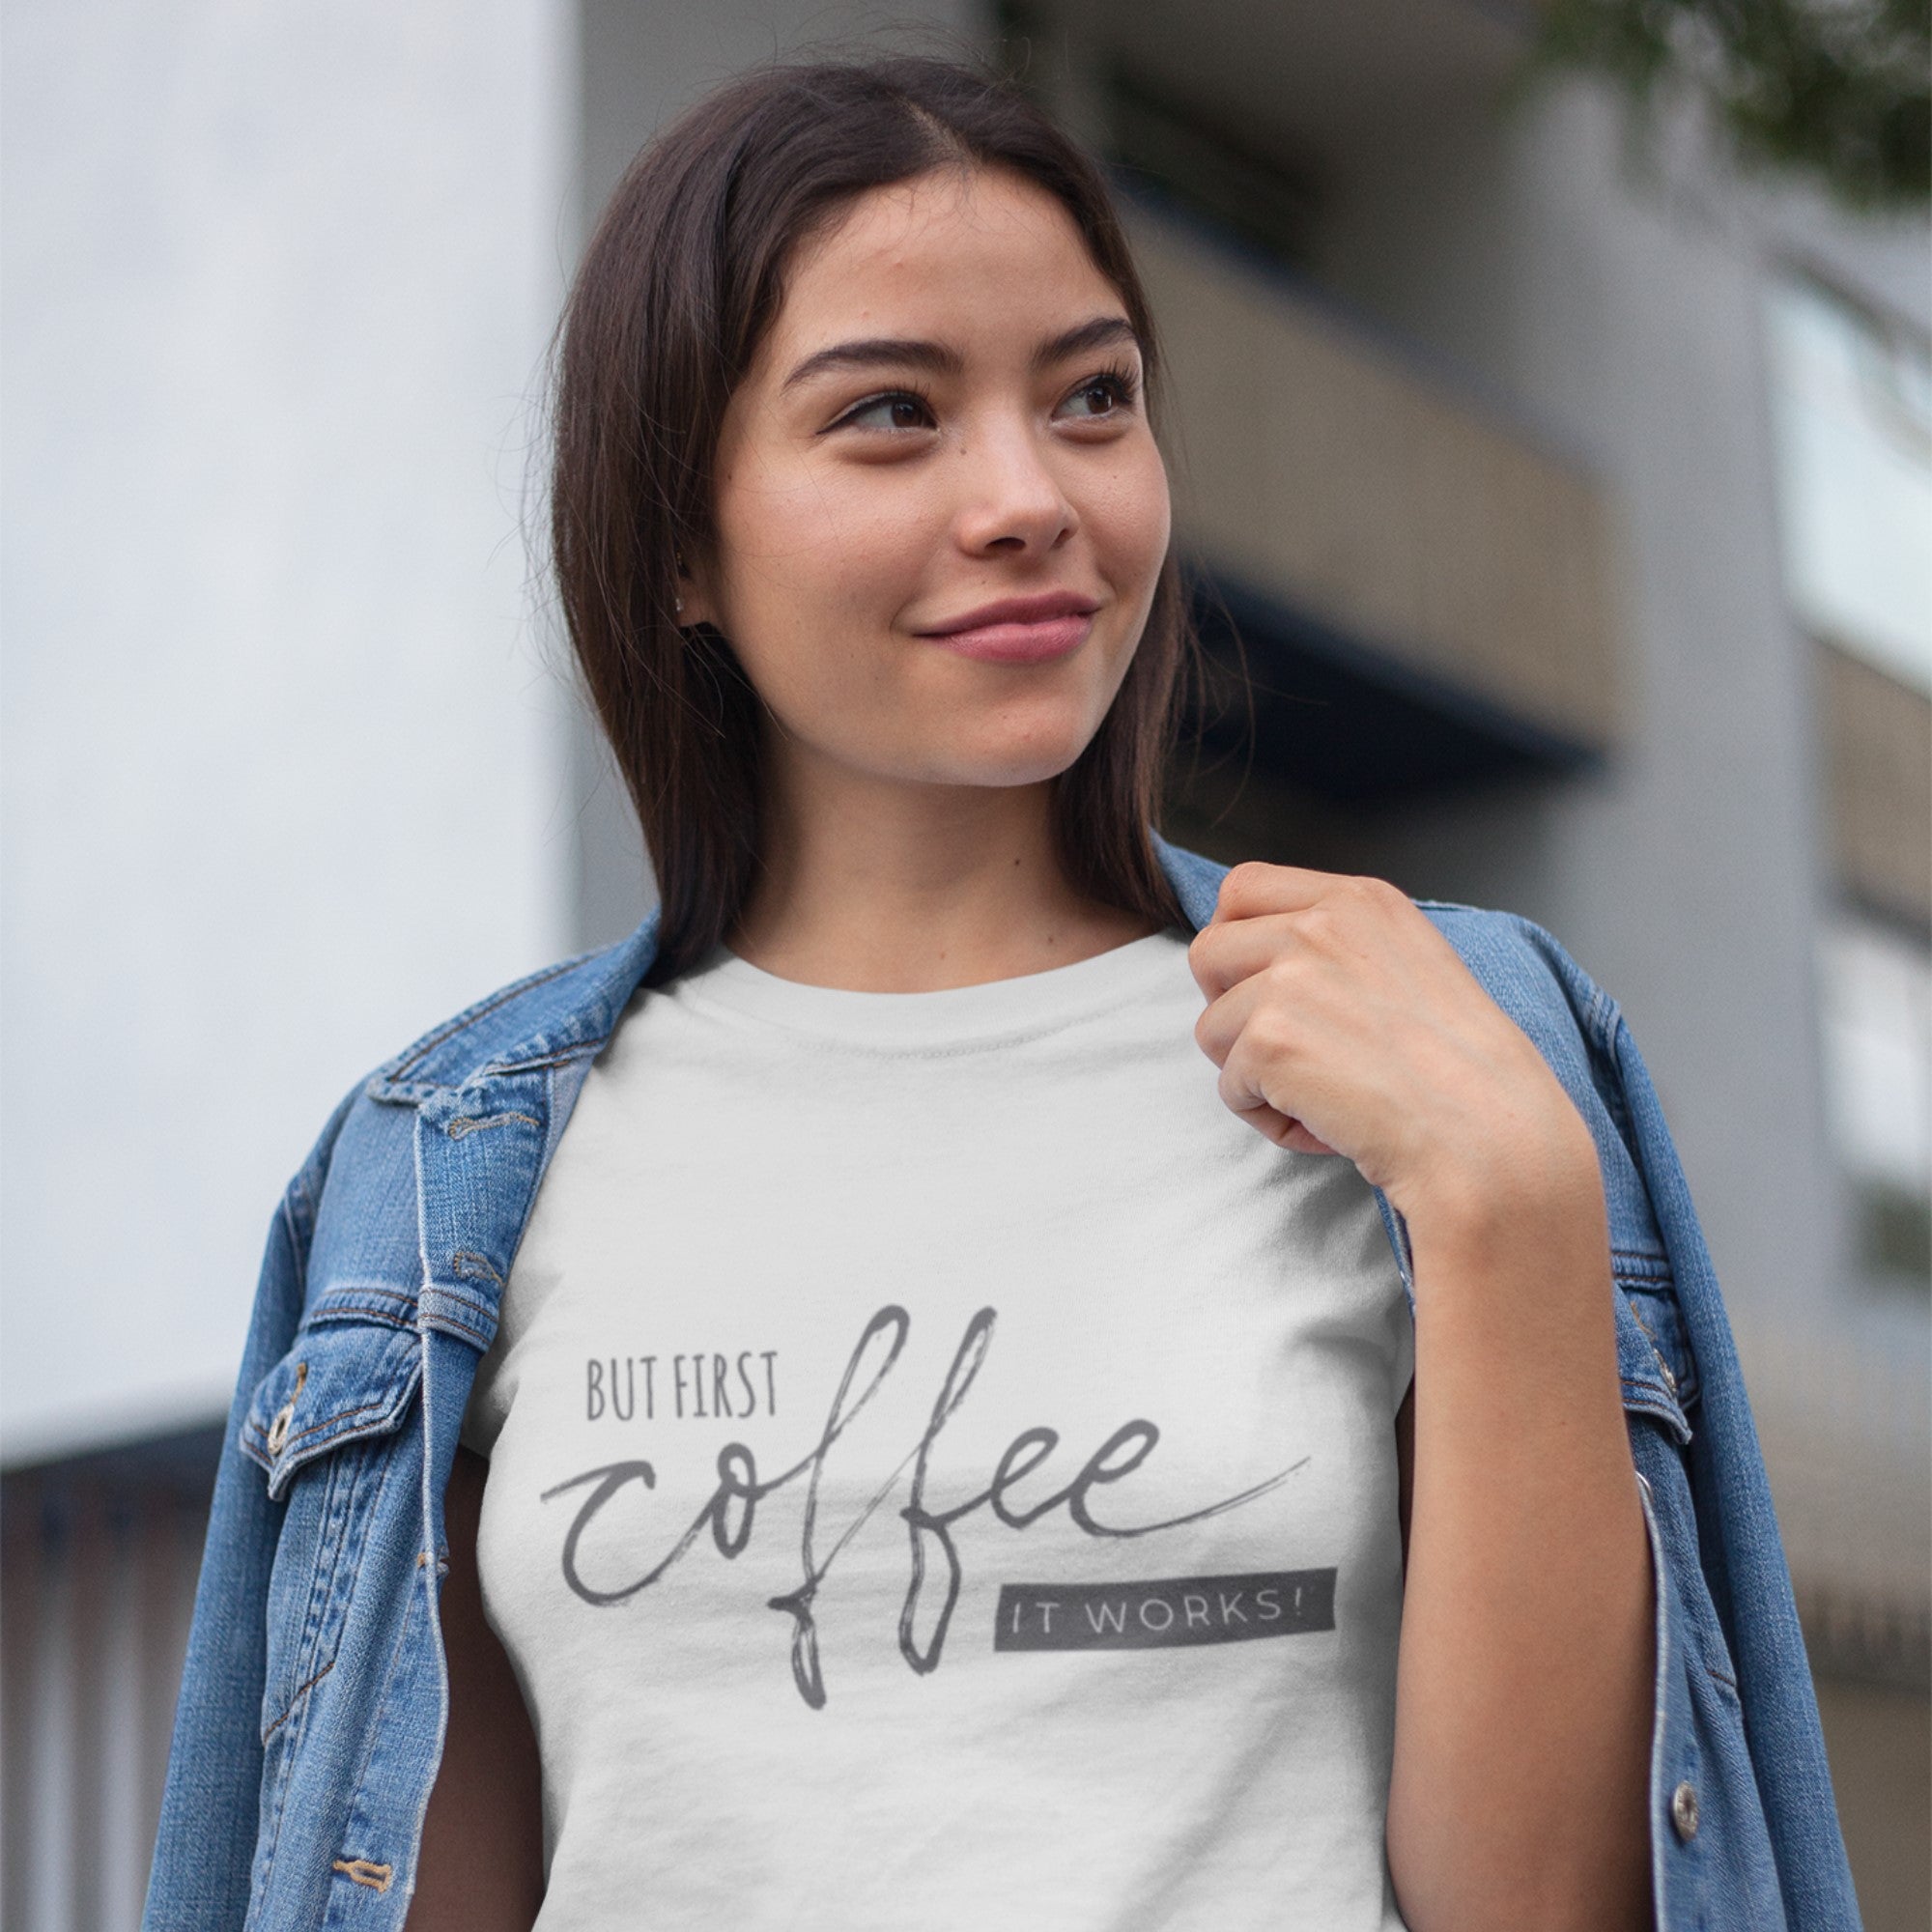 But First, Coffee - Crew Neck